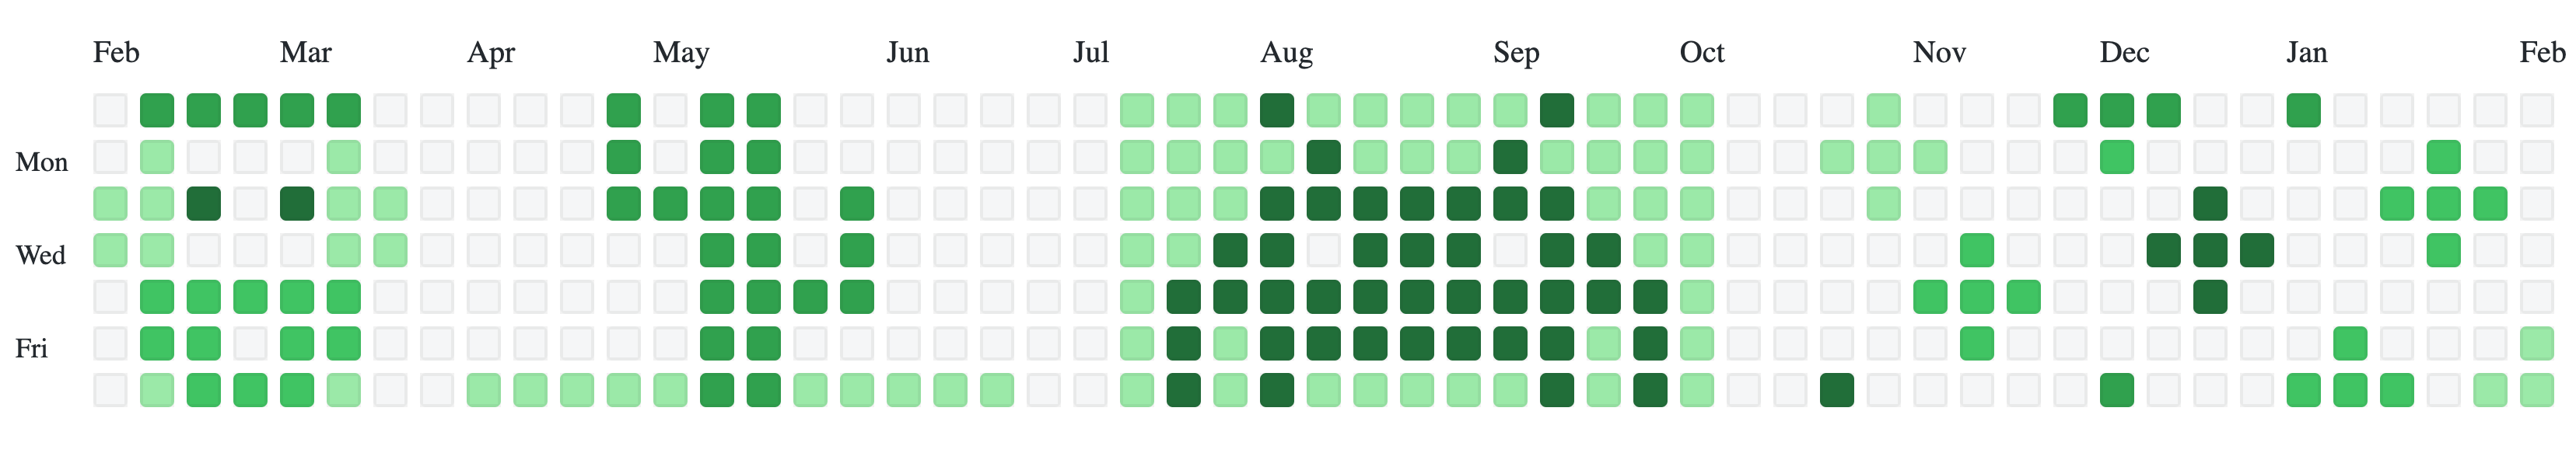 GitHub contribution graph with some random drawings such as a cactus, a heart , snowflakes and a Space invader